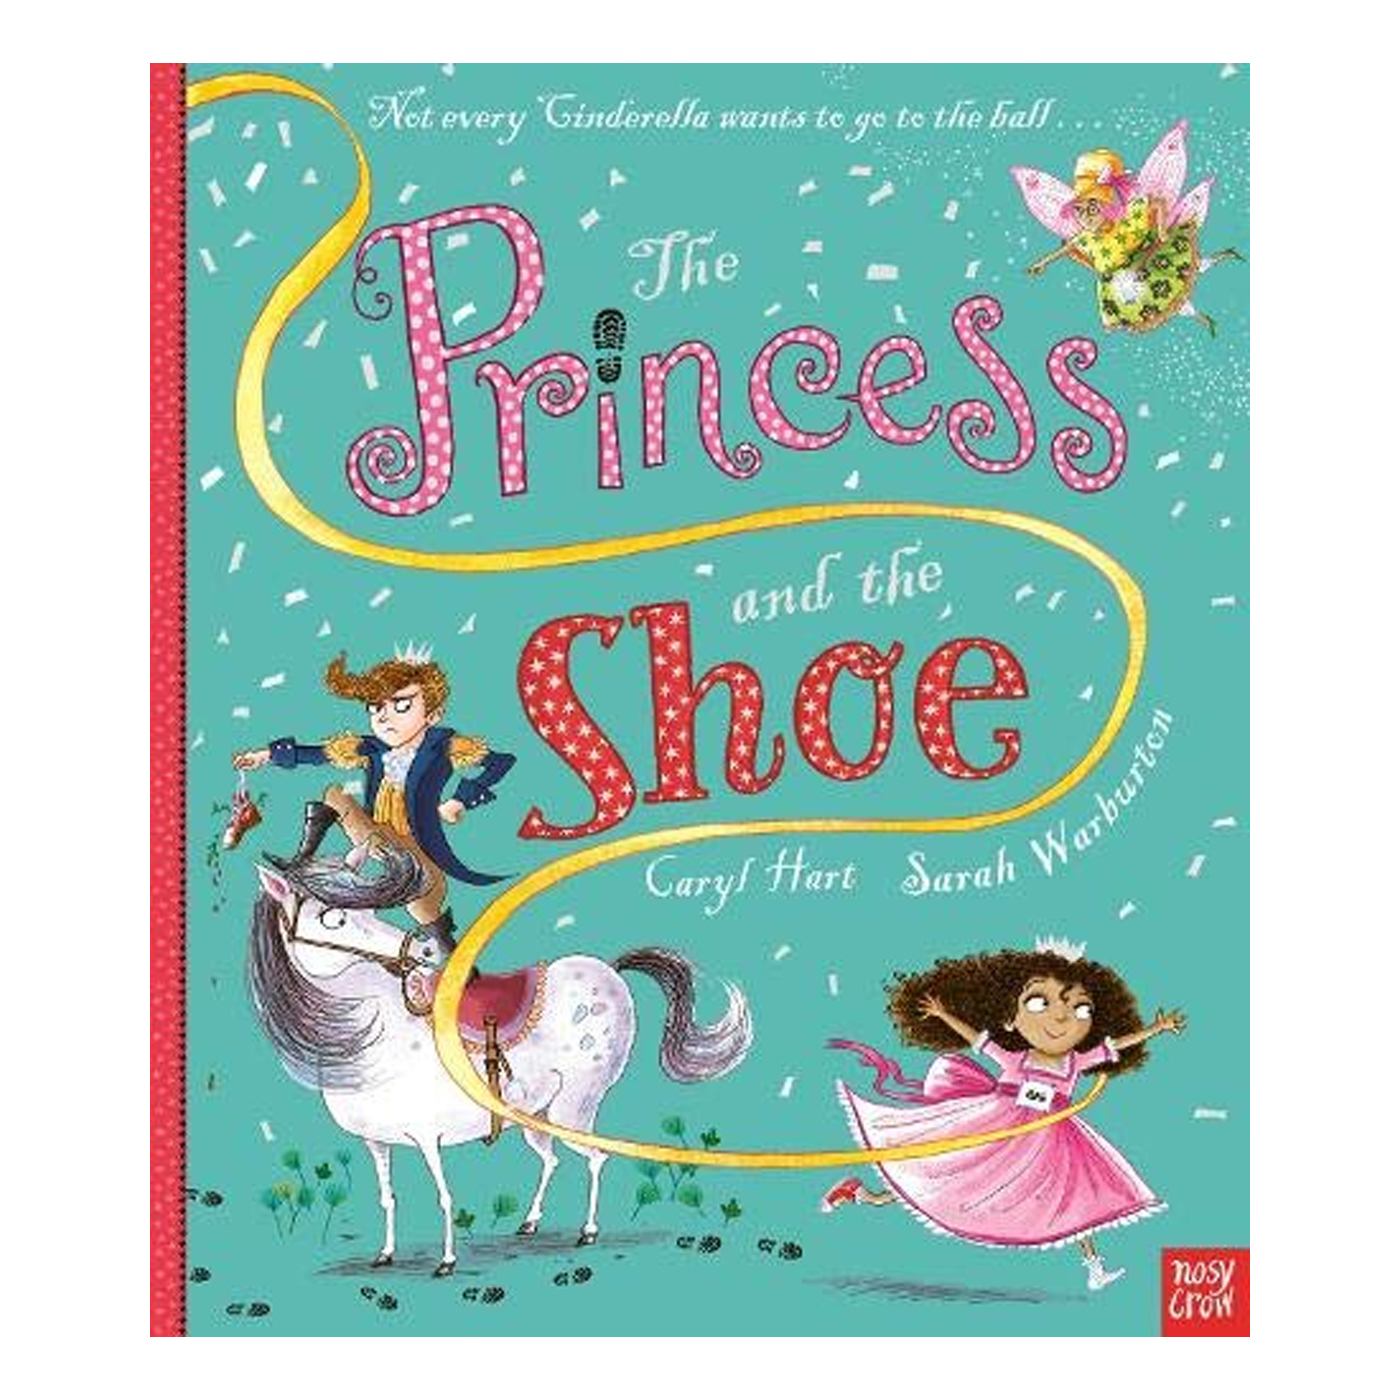  The Princess and the Shoe